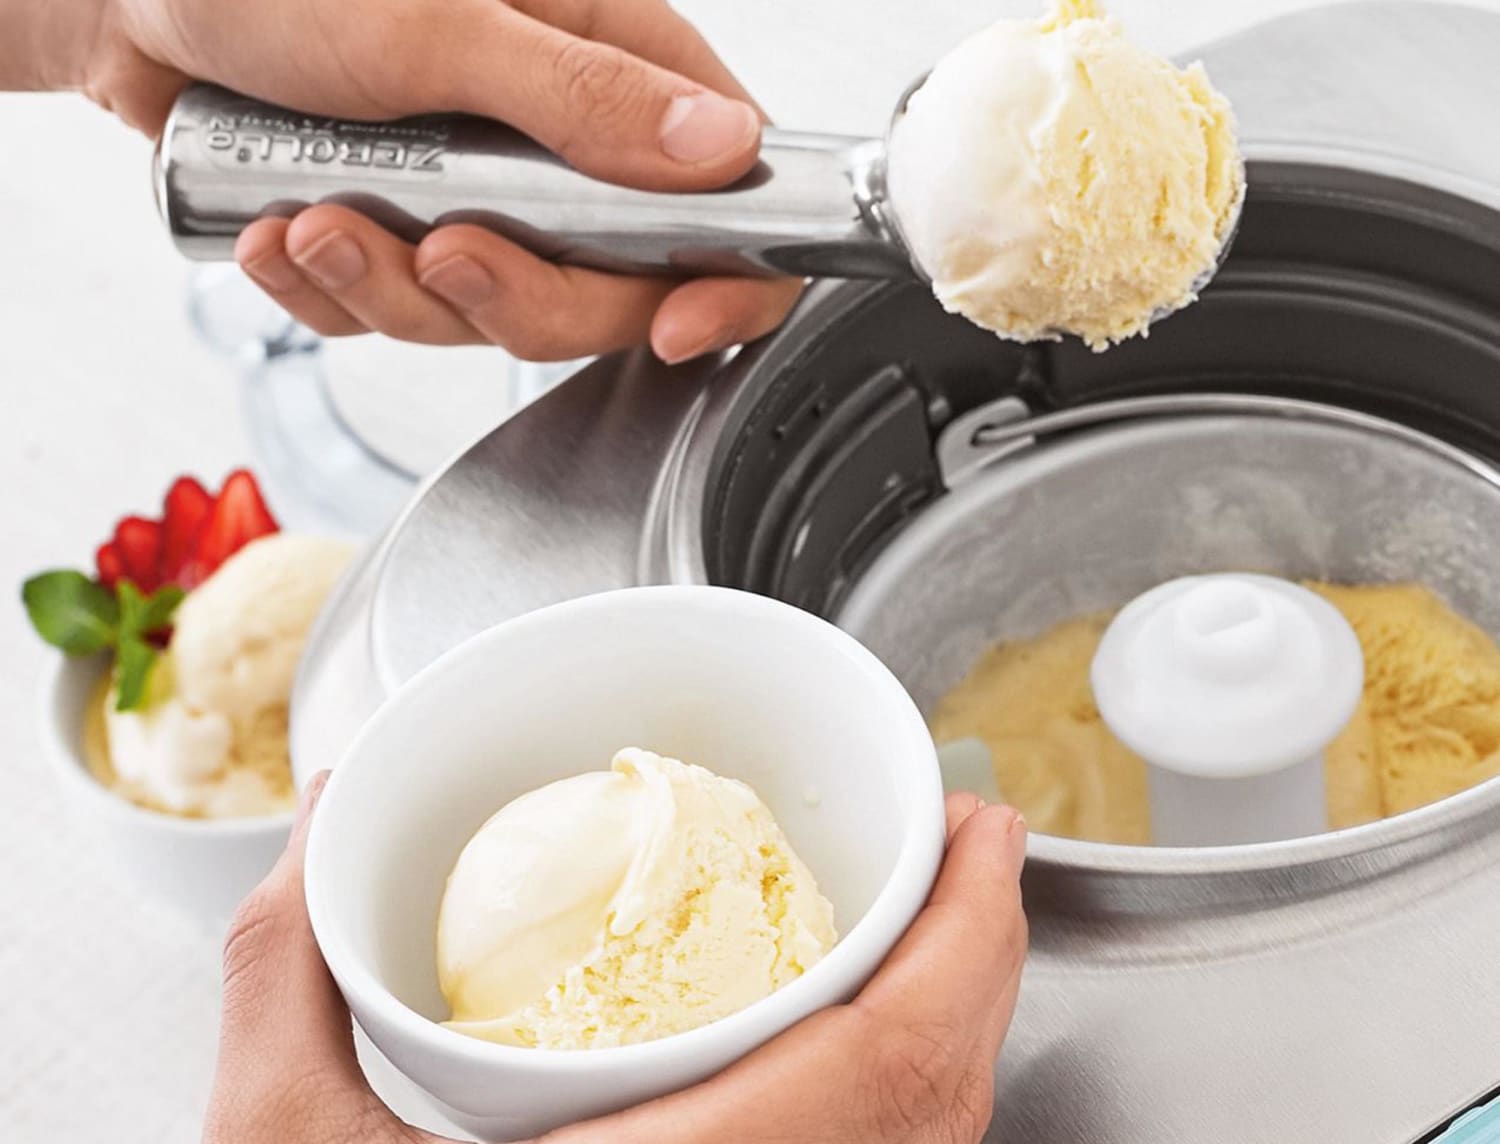 The most trusted ice cream scoop in the world 🍦 Zeroll's aluminum